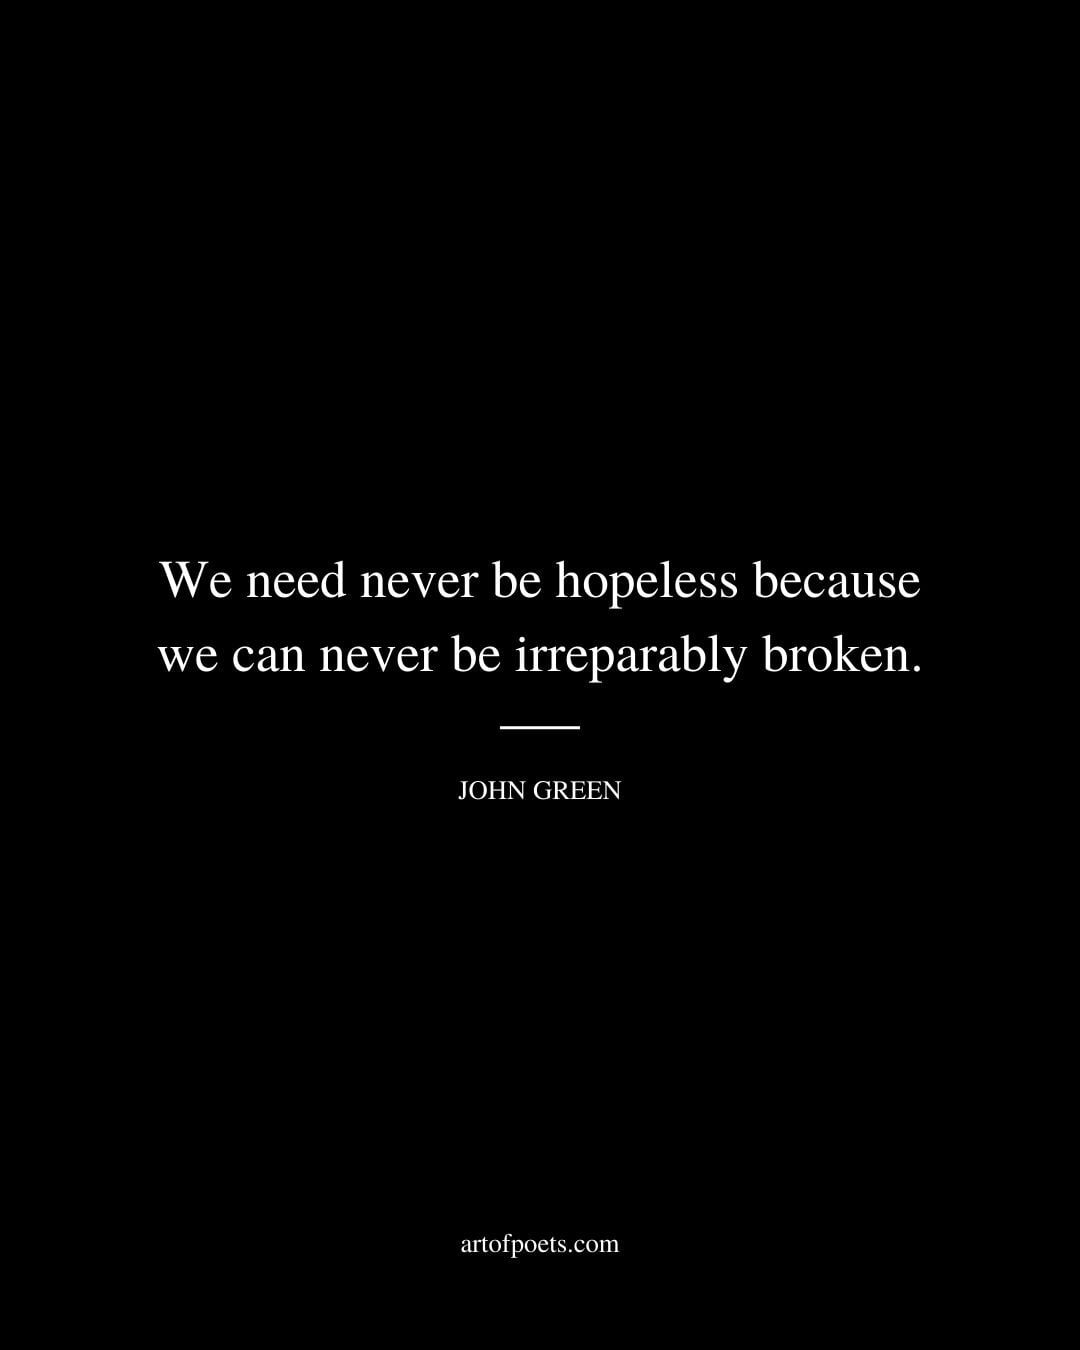 We need never be hopeless because we can never be irreparably broken. John Green